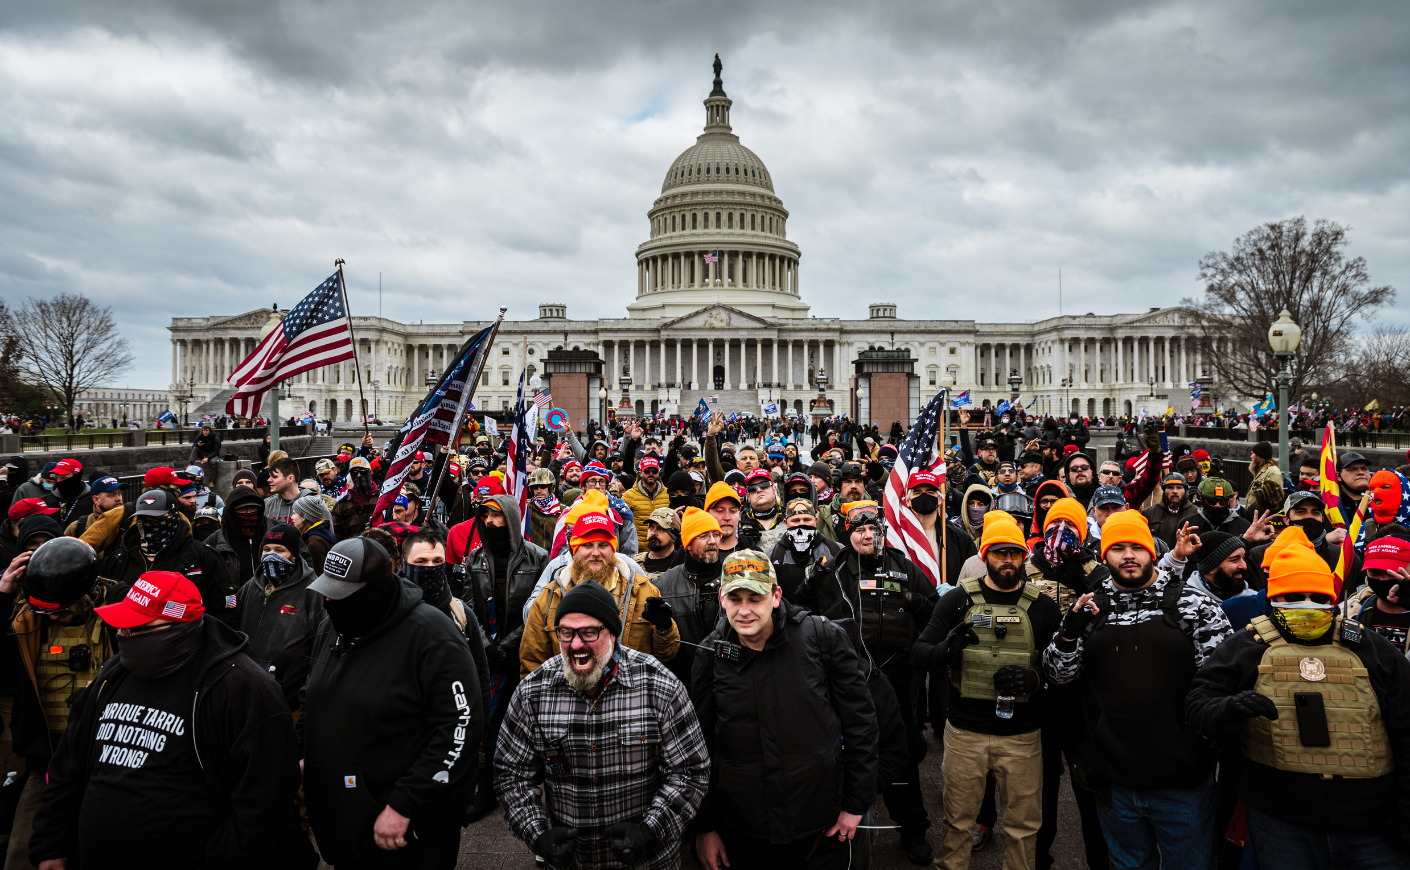 An angry crowd gathers at the U.S. Capitol on Jan. 6, 2021